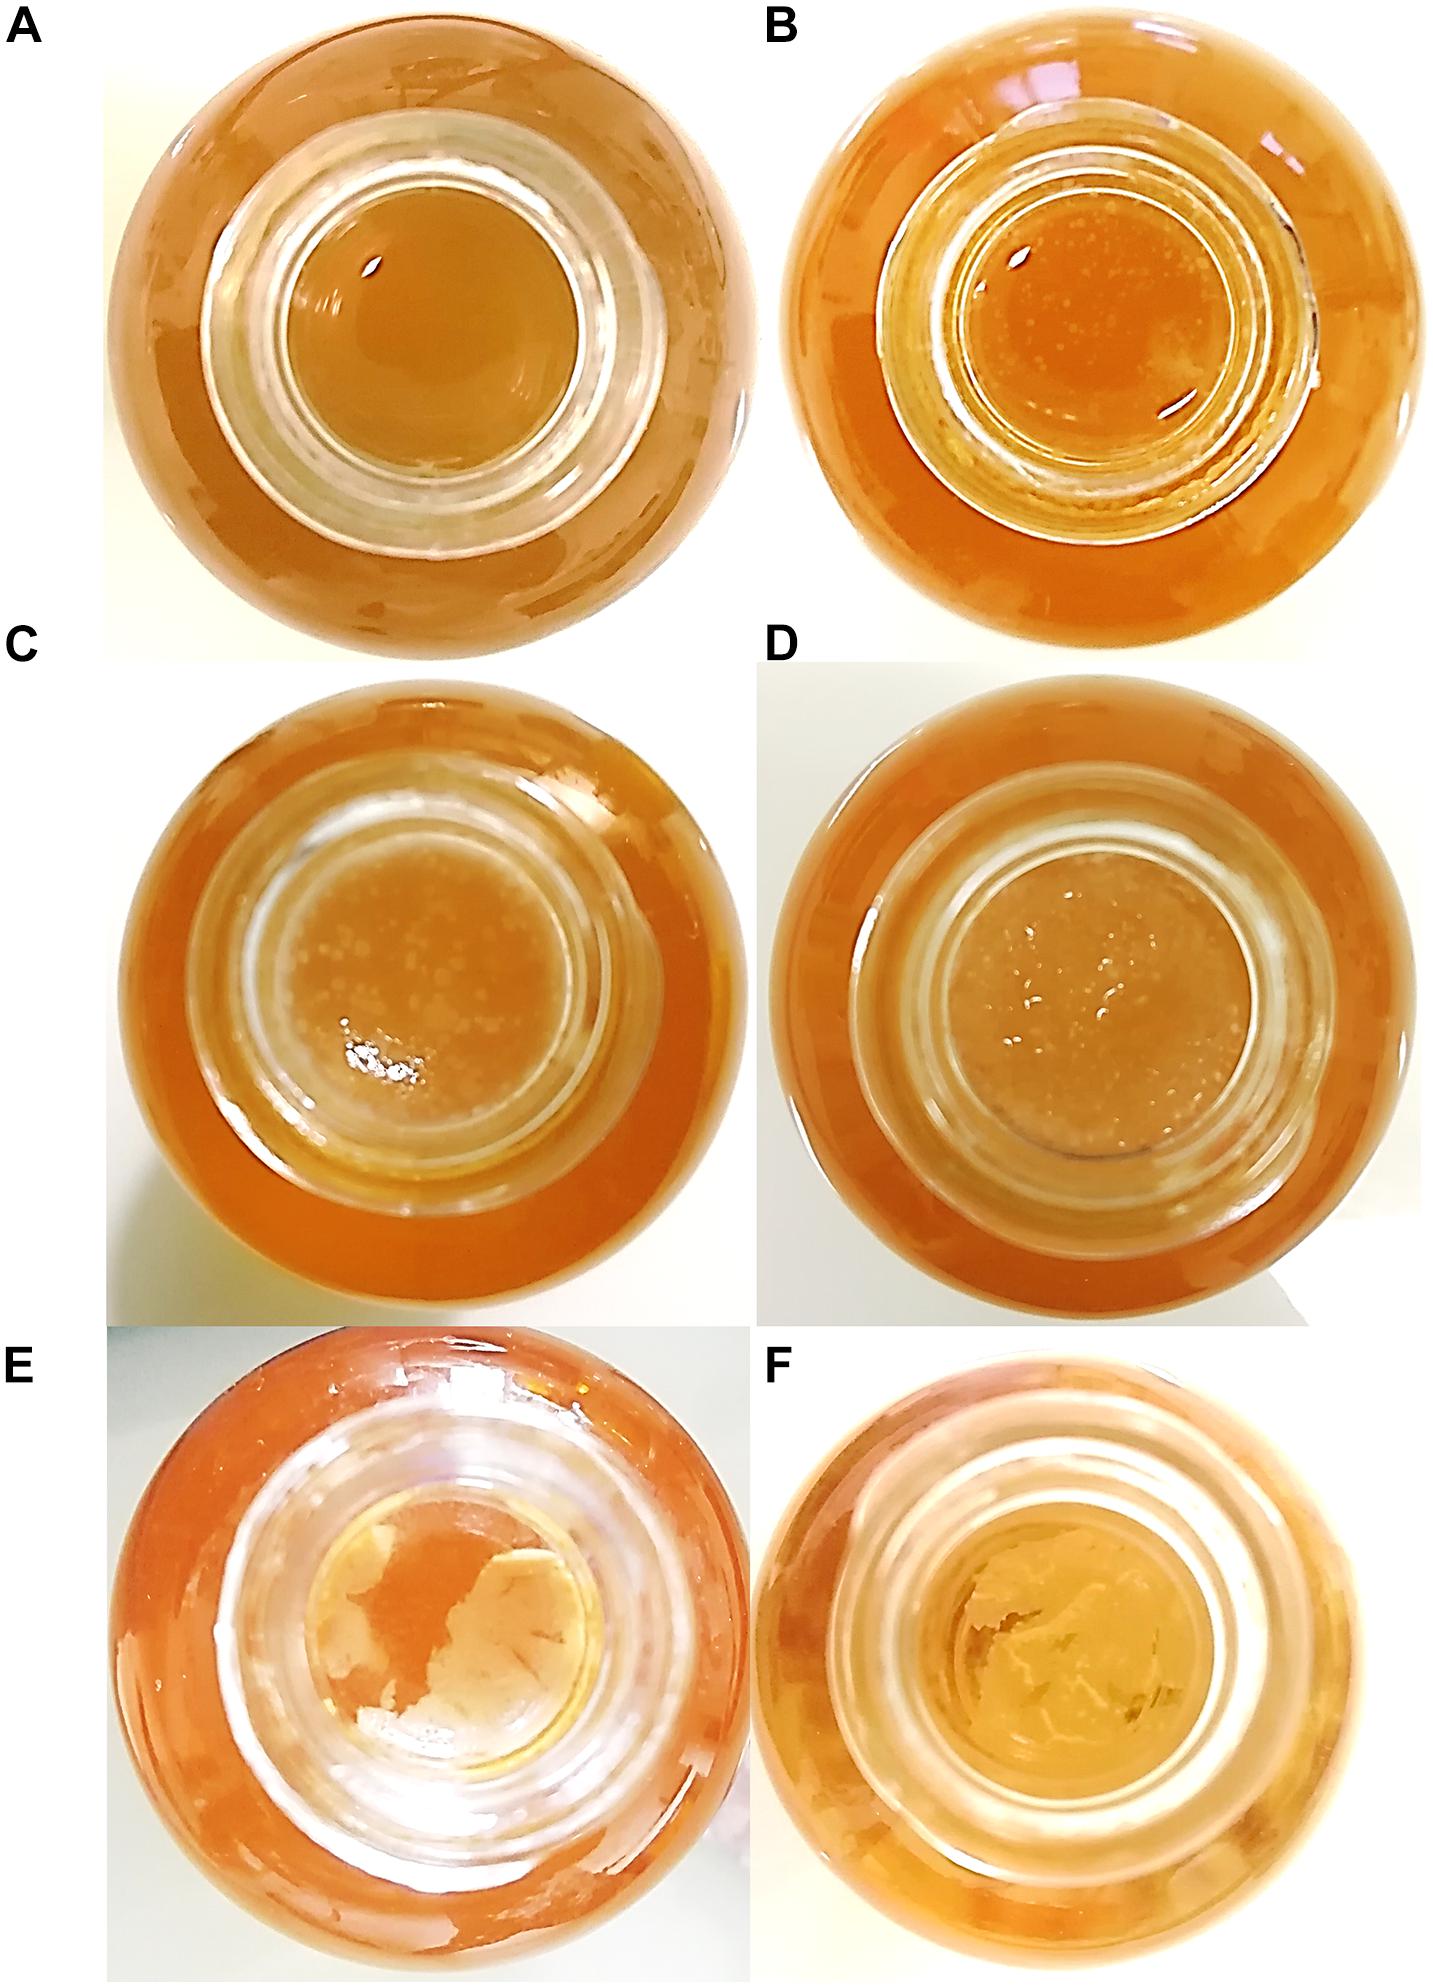 Frontiers  Shedding Light on the Formation and Structure of Kombucha  Biofilm Using Two-Photon Fluorescence Microscopy